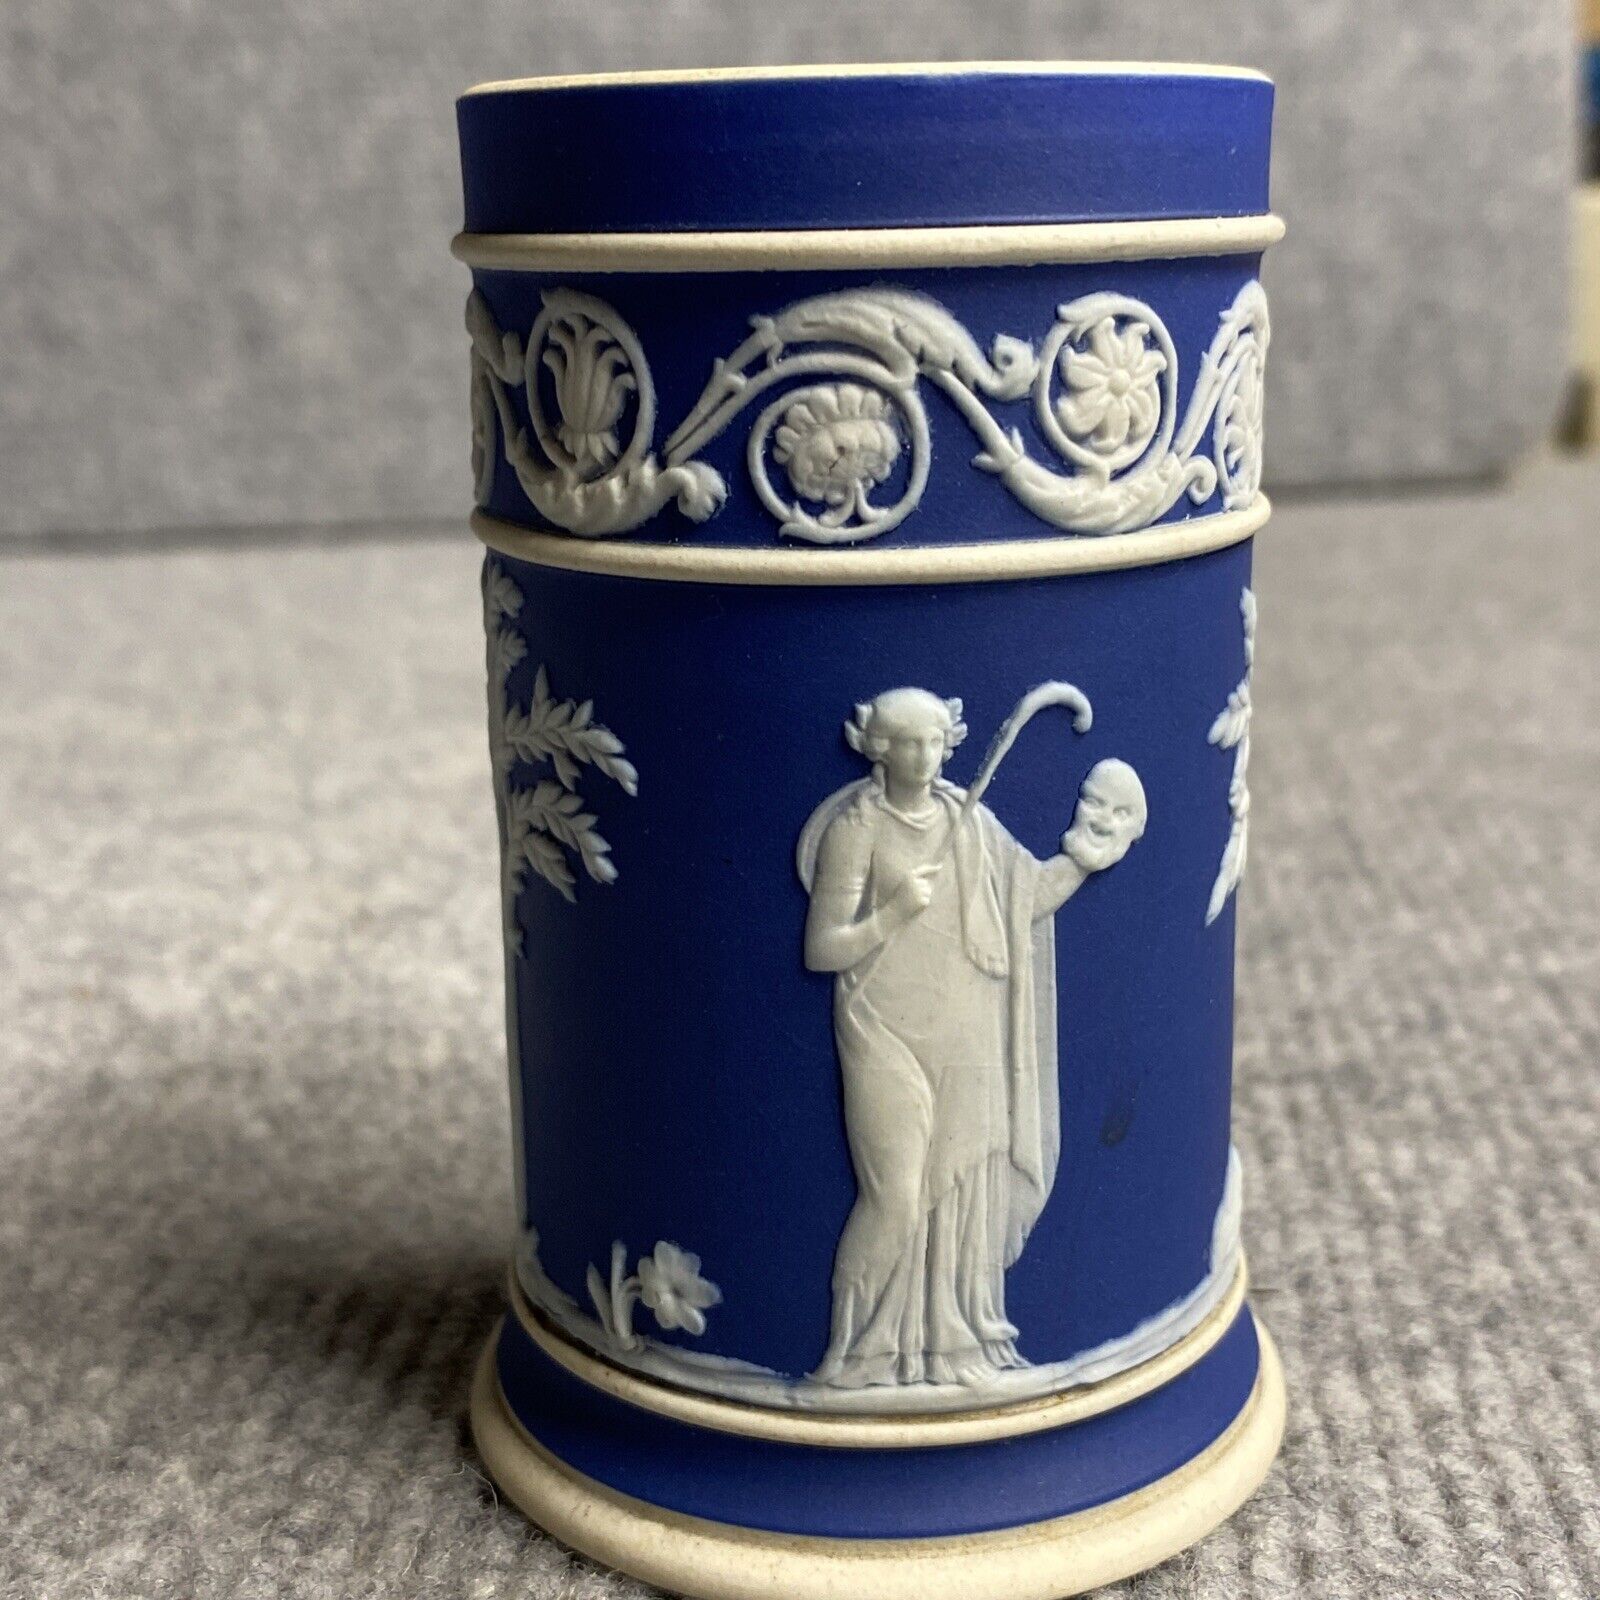 Antique WEDGWOOD Tall Cyclinder Match Holder / Toothpick 